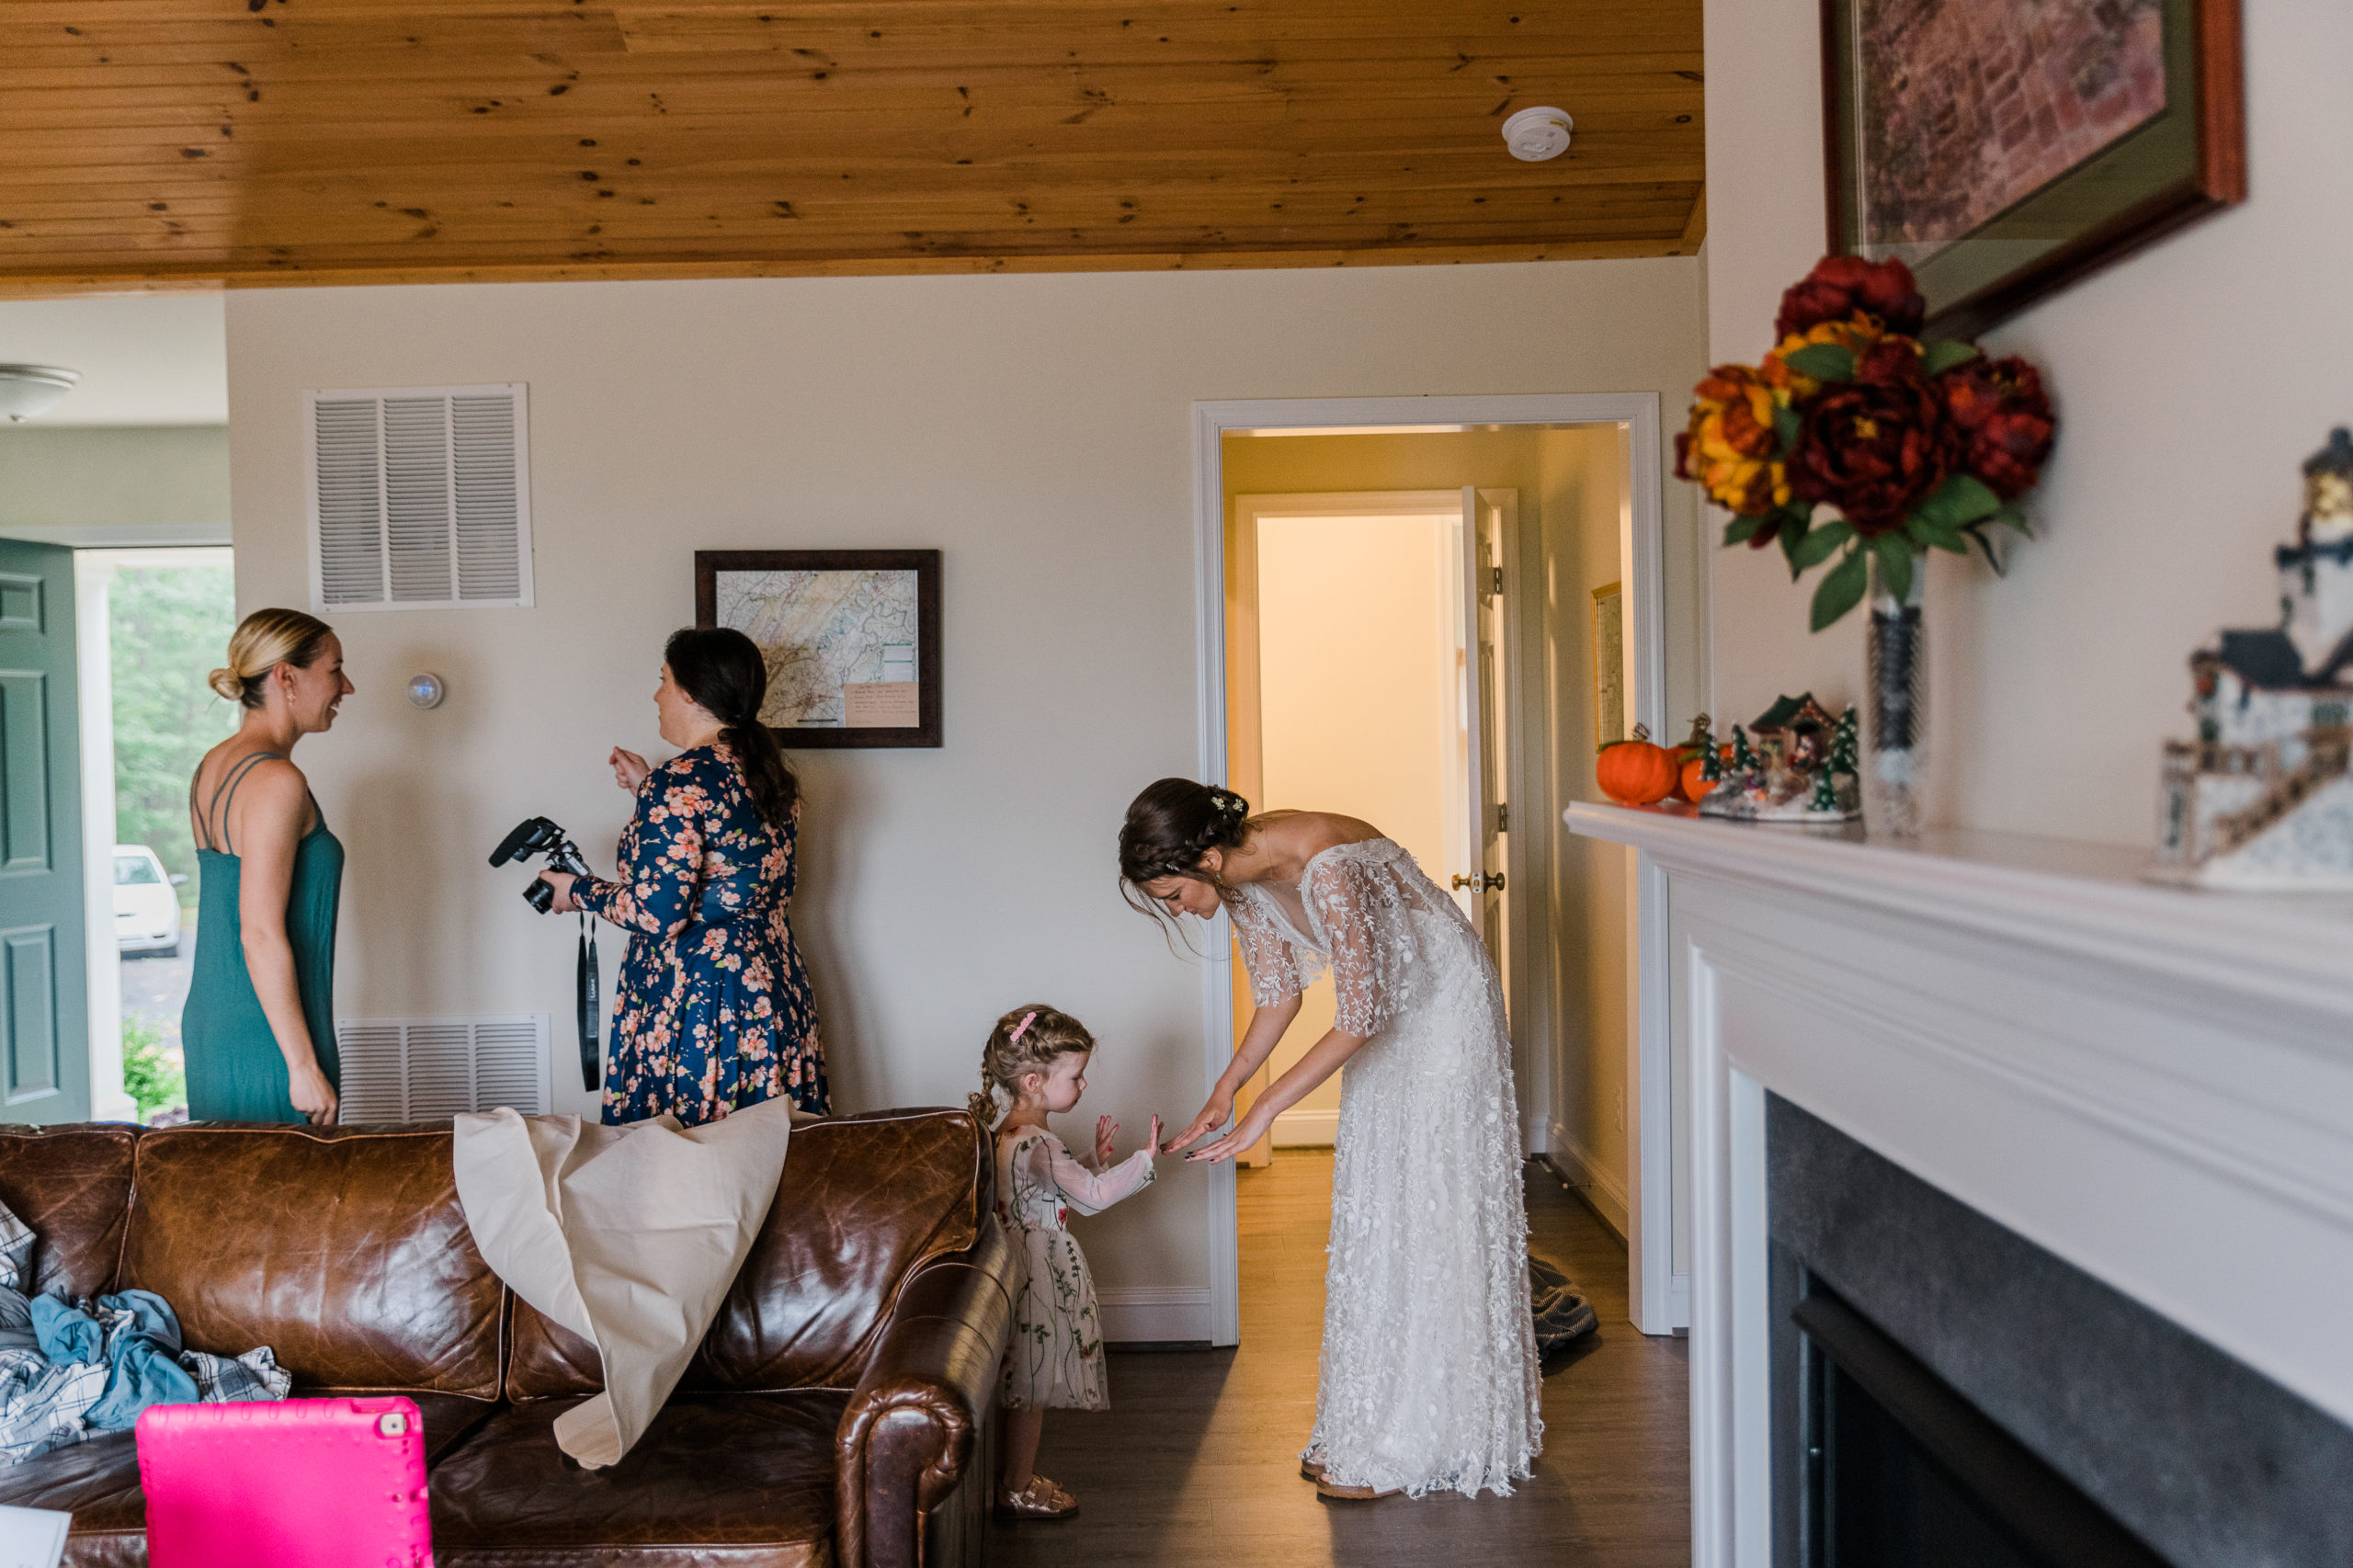 A bride in a white wedding dress bending down to talk to a little girl